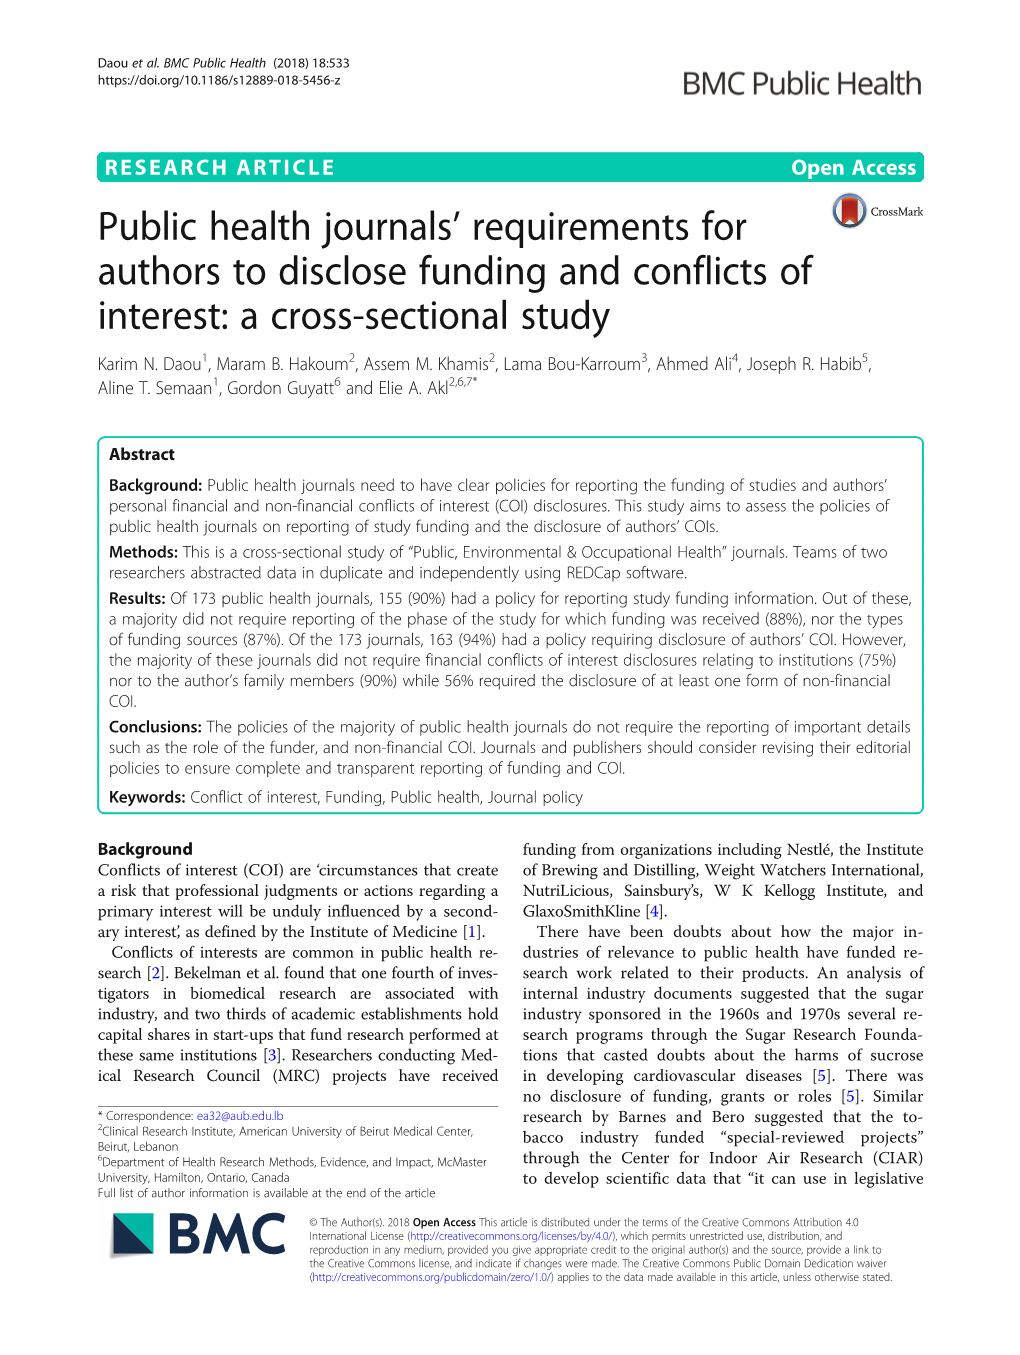 Public Health Journals' Requirements for Authors to Disclose Funding and Conflicts of Interest: a Cross-Sectional Study